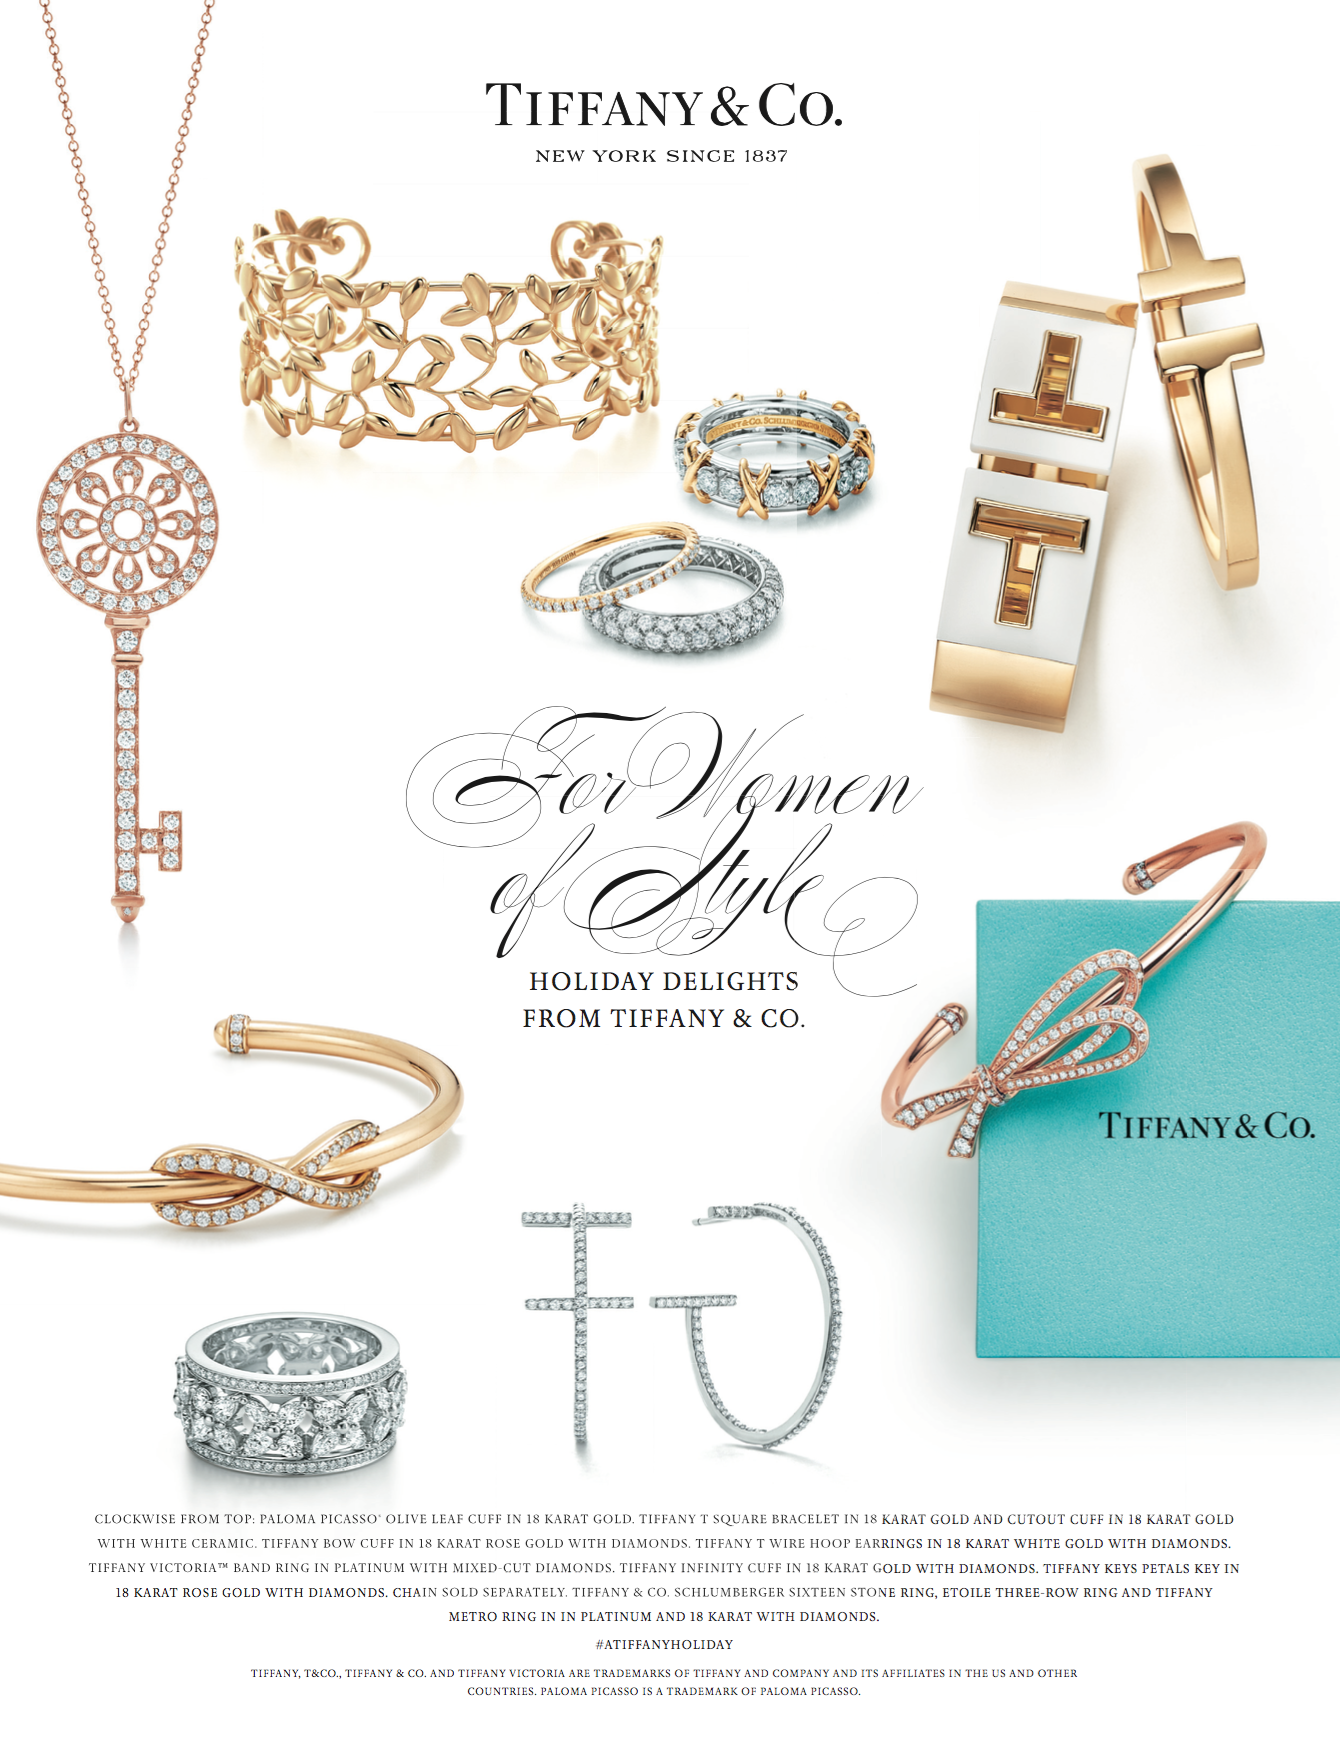 Tiffany & Co Christmas Gifting Ideas For Him and Her!